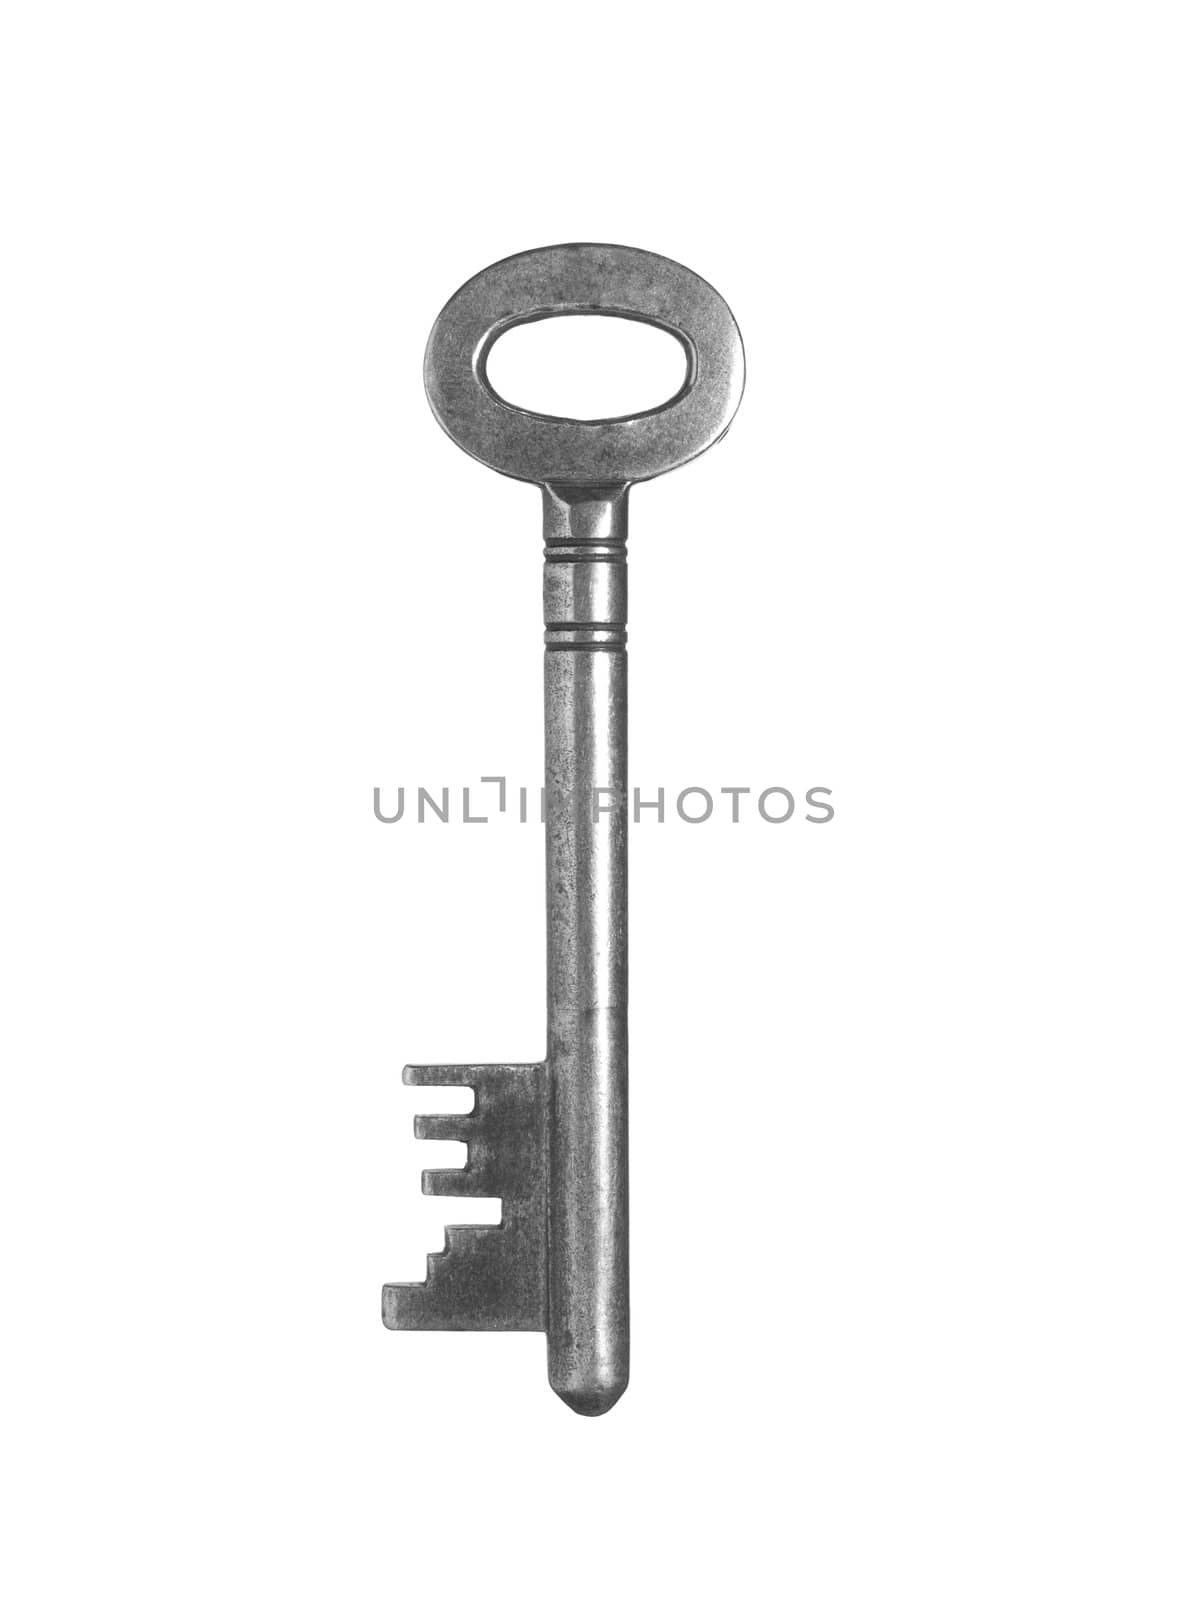 An old silver key isolated on white background.